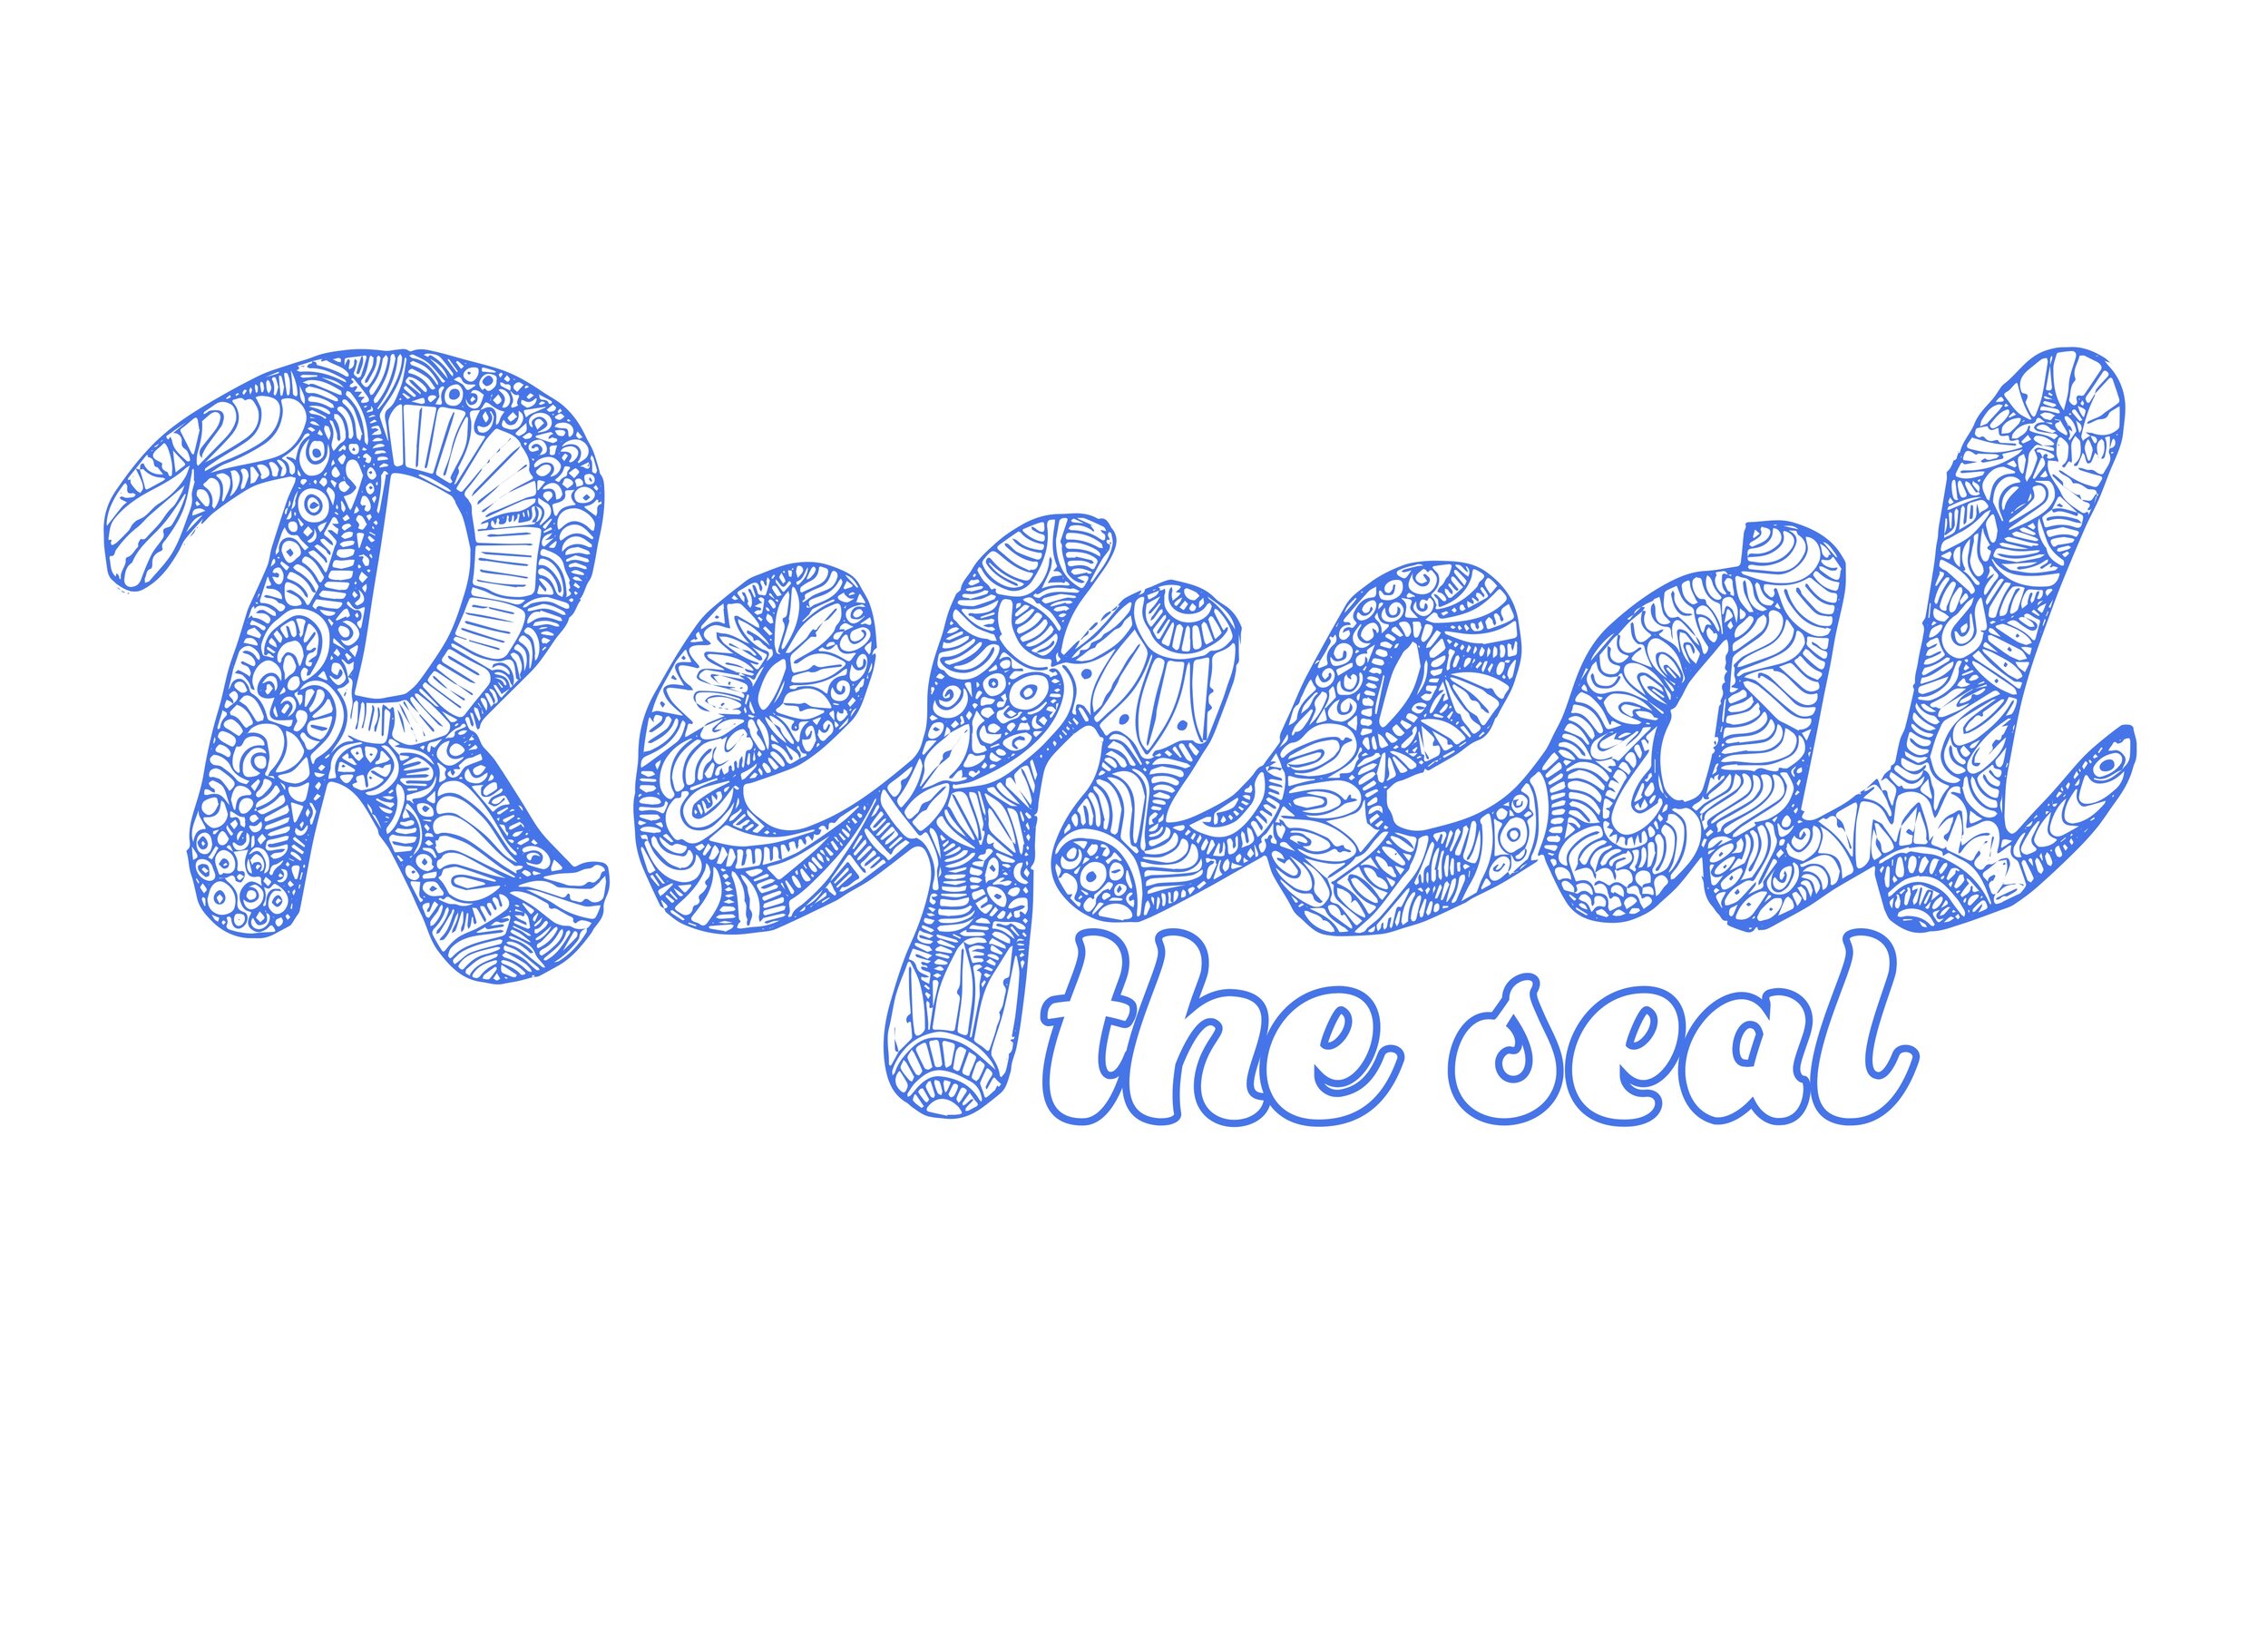 Repeal the seal. Open the archive.